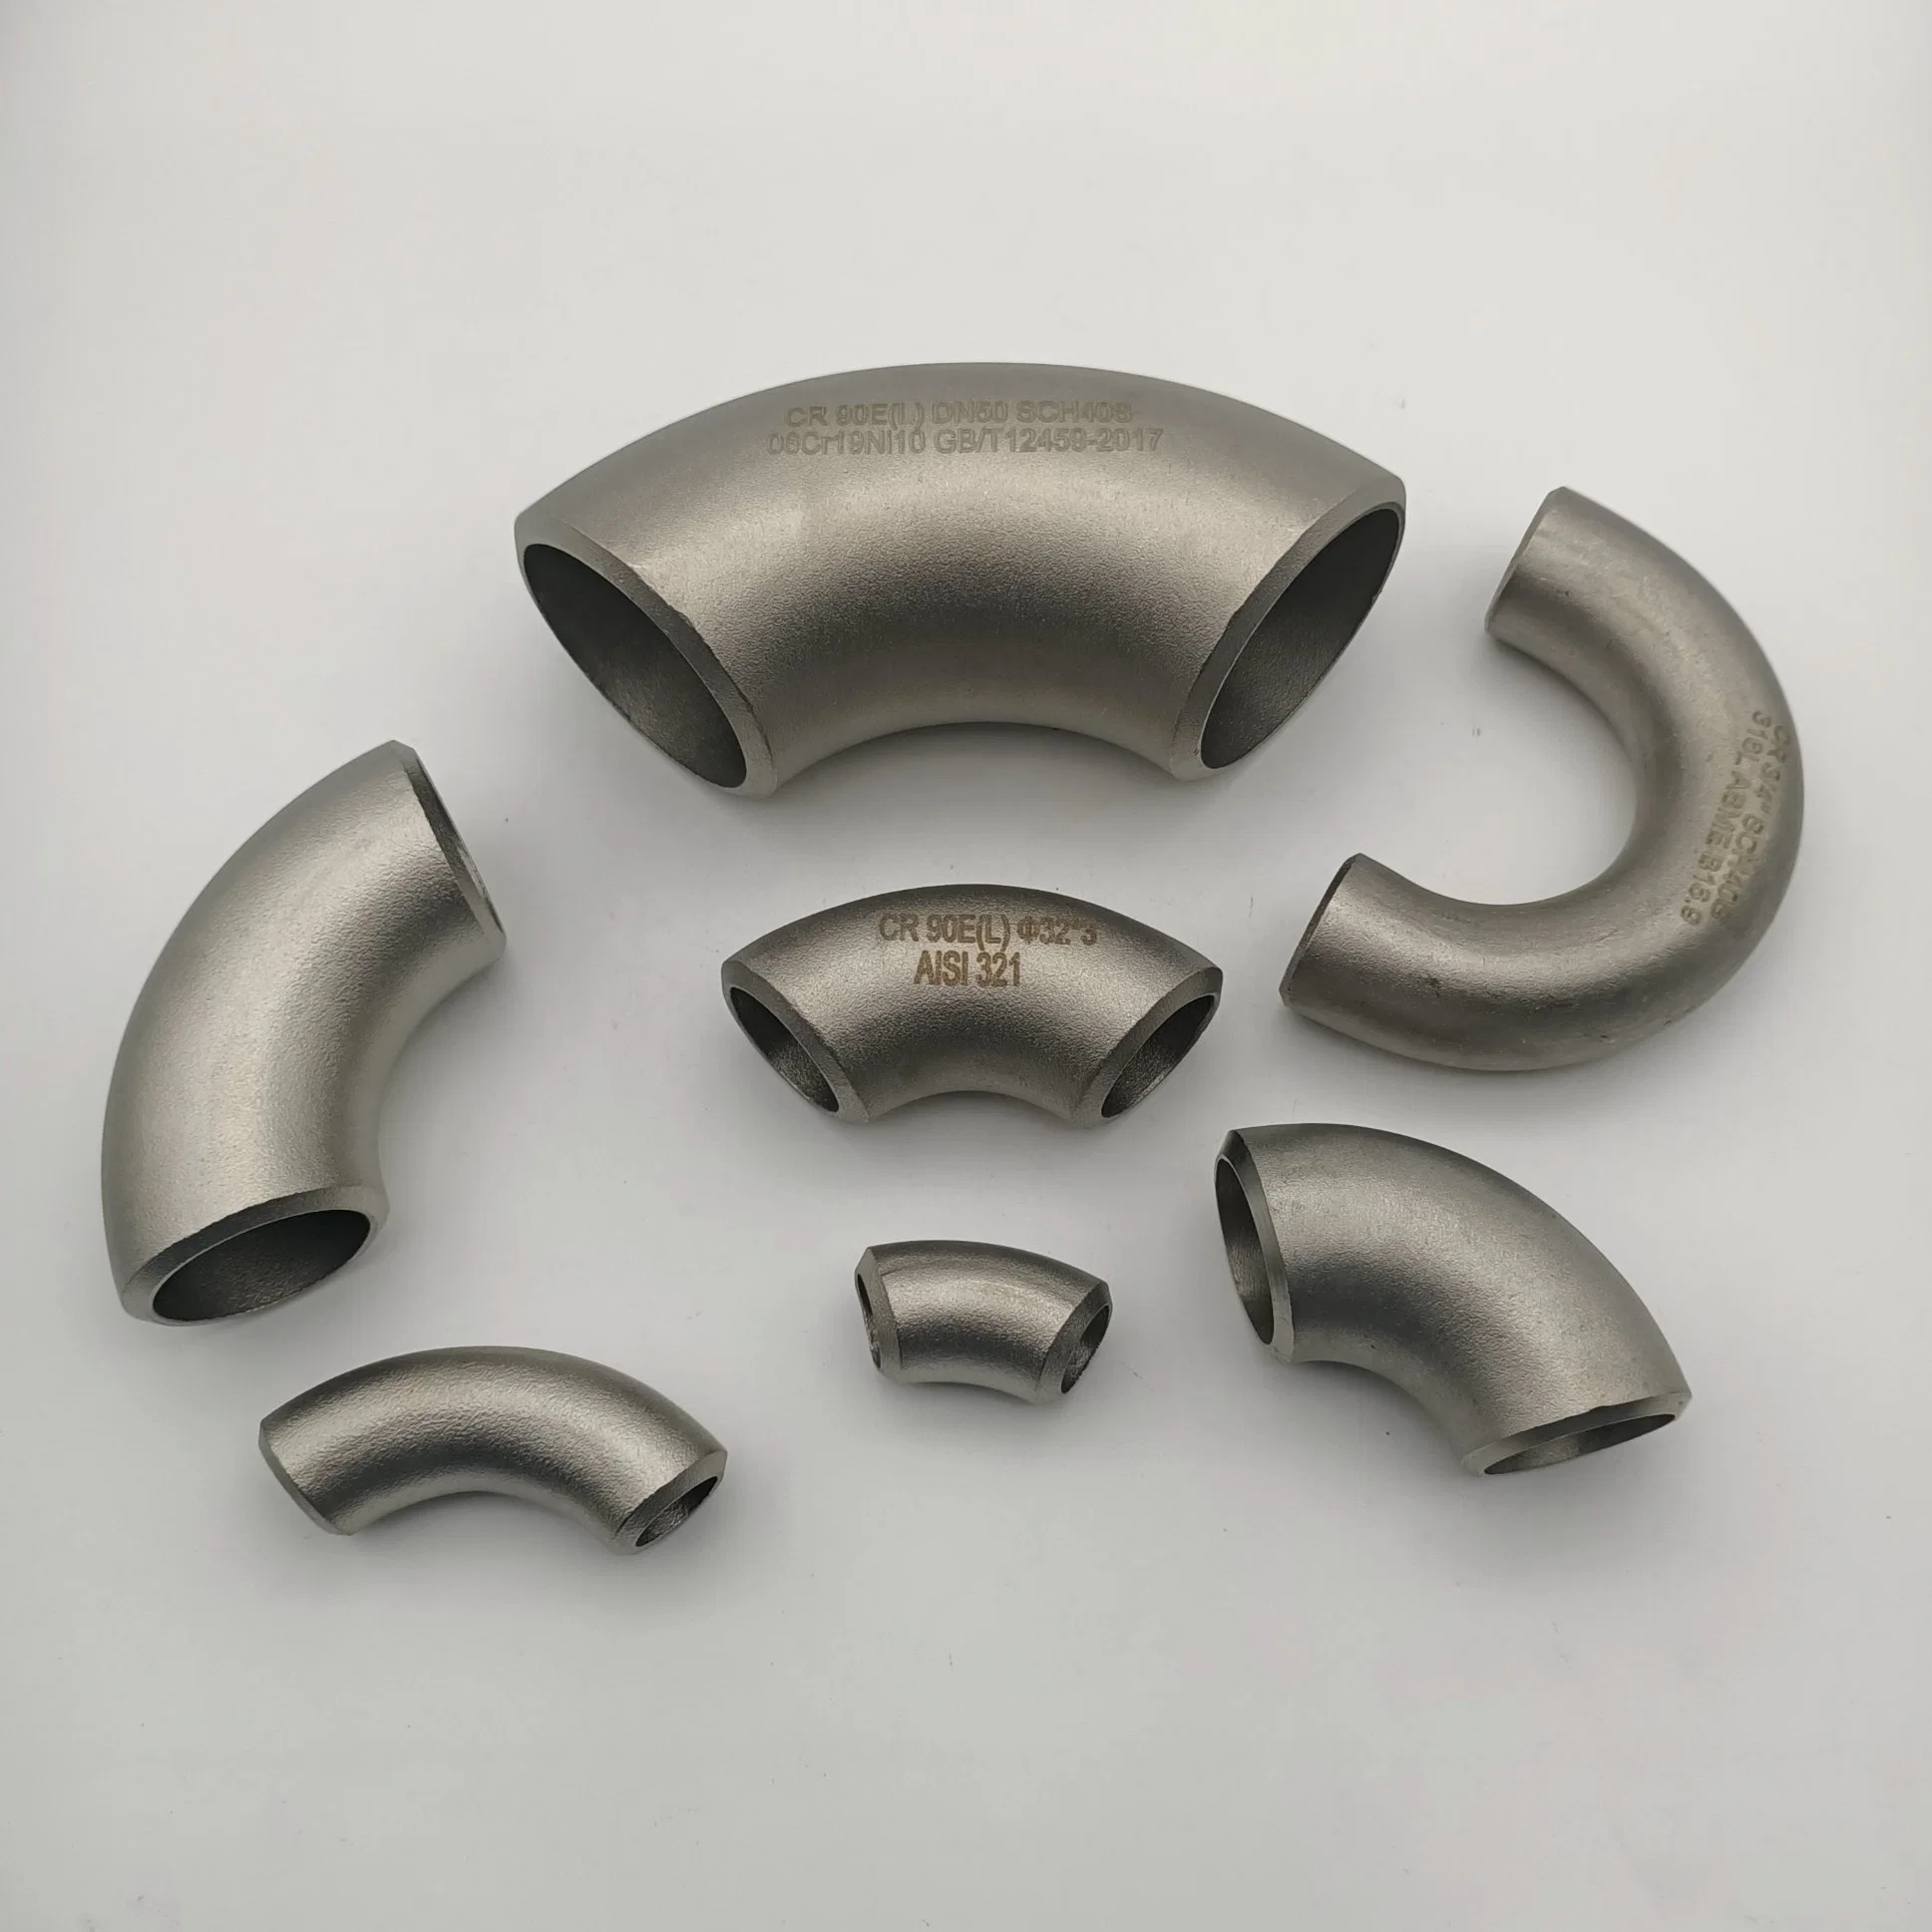 ASTM A234 45/60/90/180 High Pressure Degree Welded Stainless Steel Multi Punched Butt Weld Pipe Fitting Elbow Bend